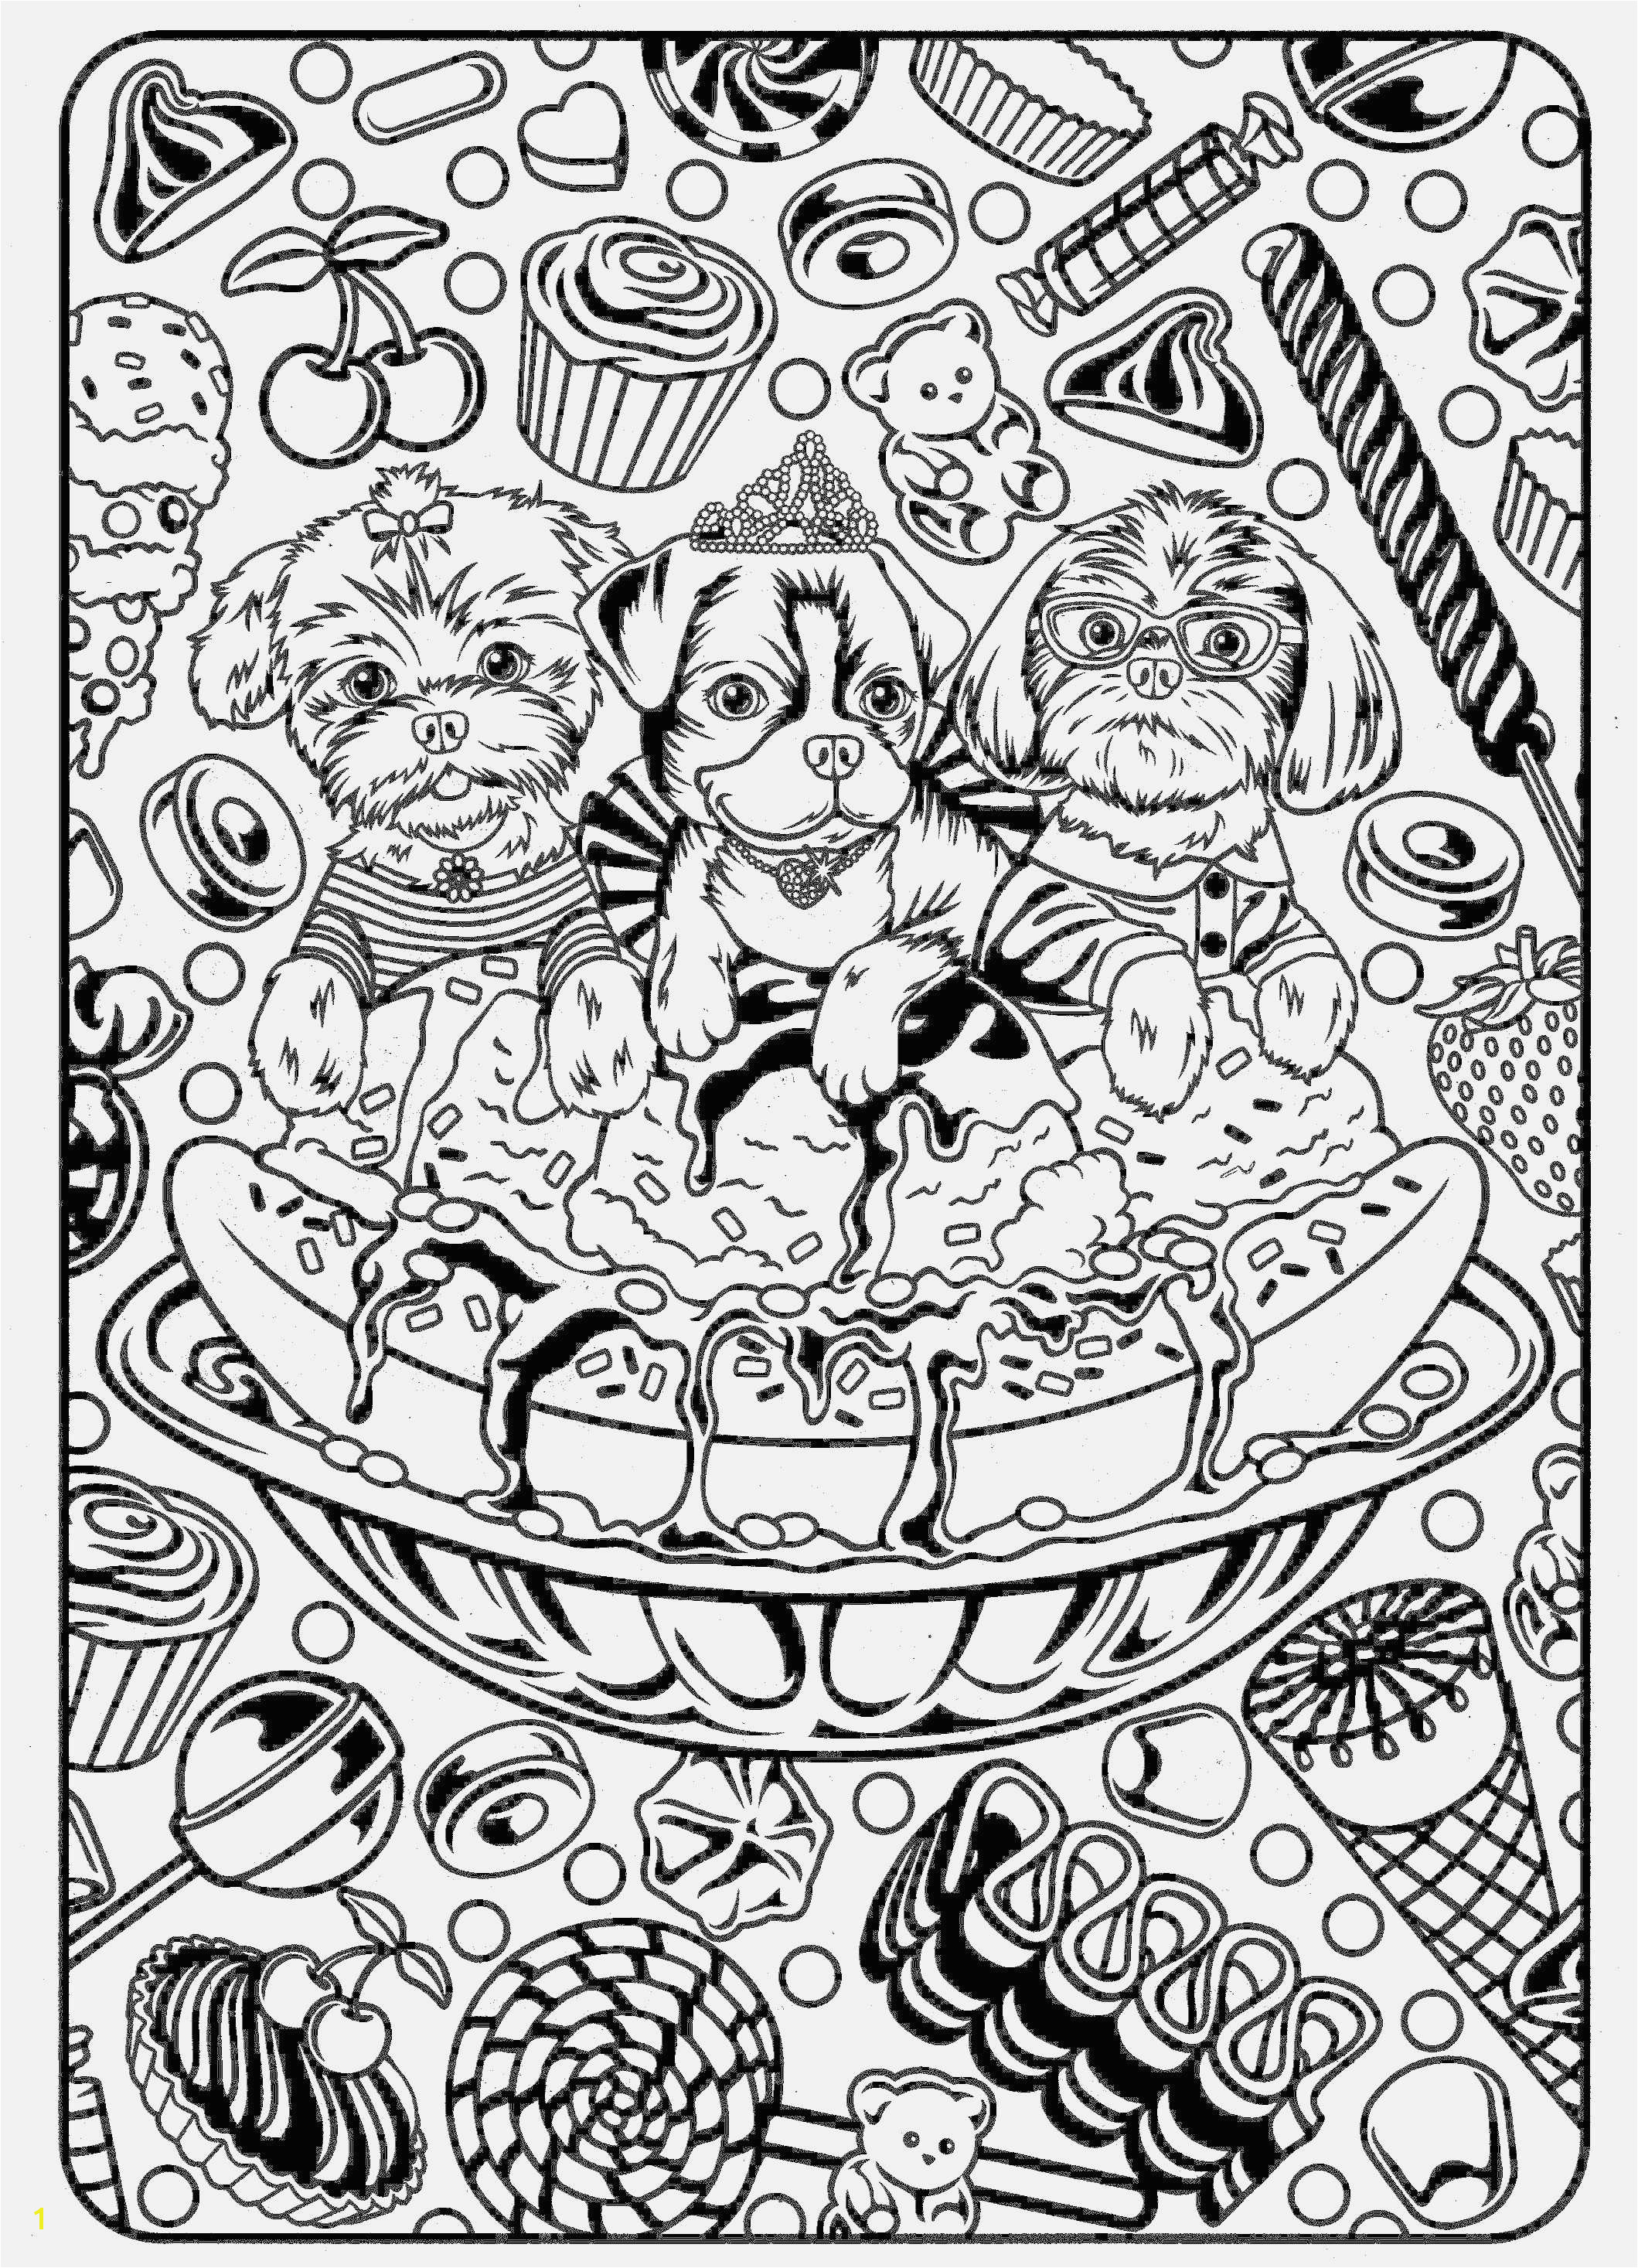 Cloud Coloring Page Luxury Parrot Coloring Pages Free Coloring Pages Elegant Crayola Pages 0d Cloud